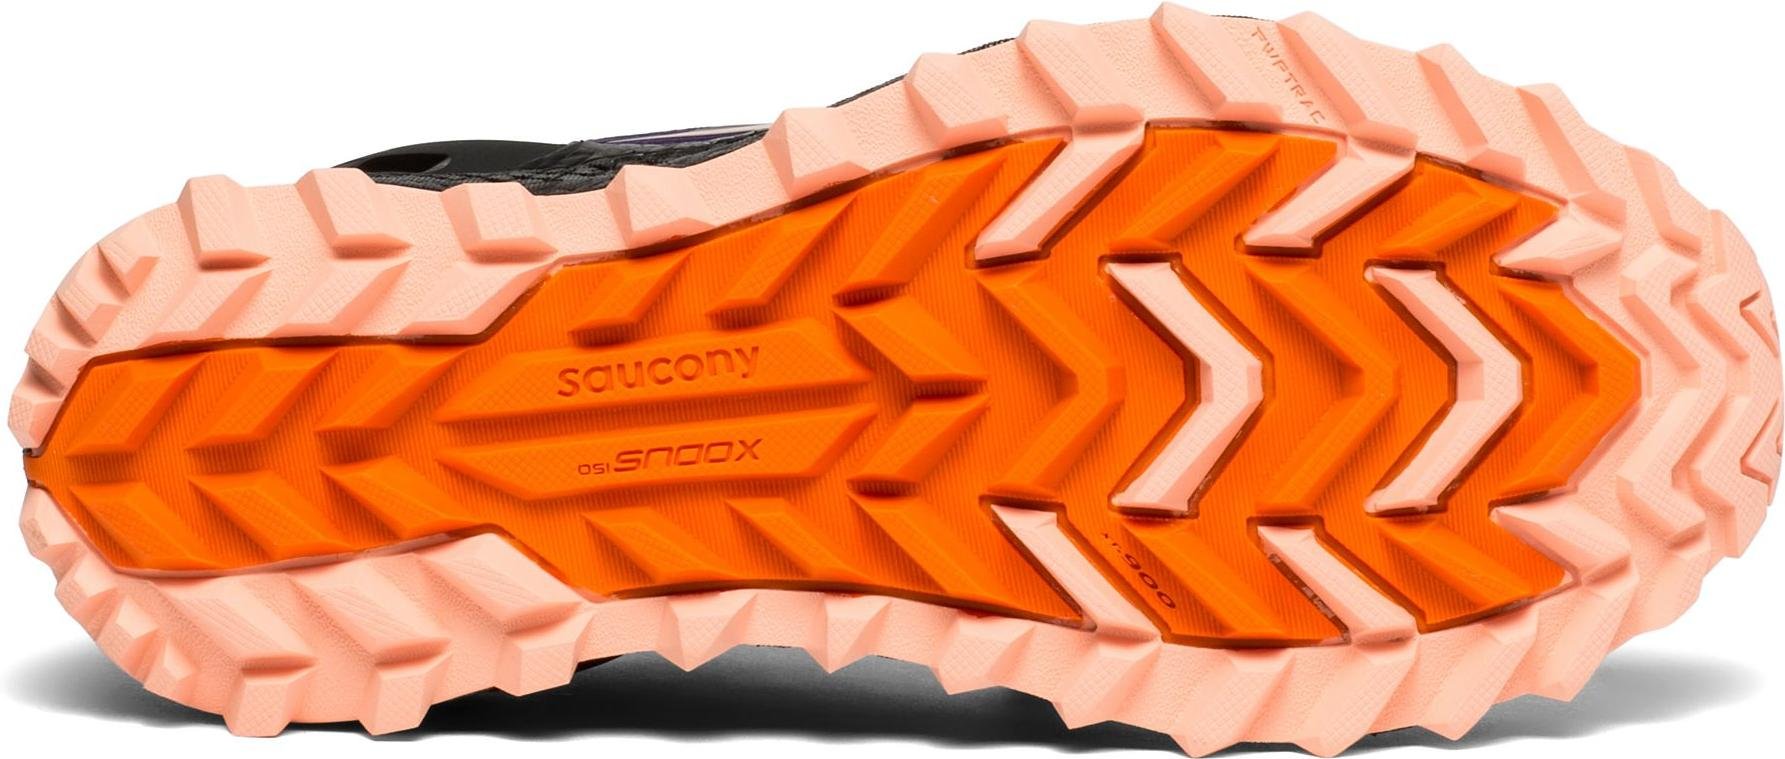 saucony xodus 3.0 trail running shoes